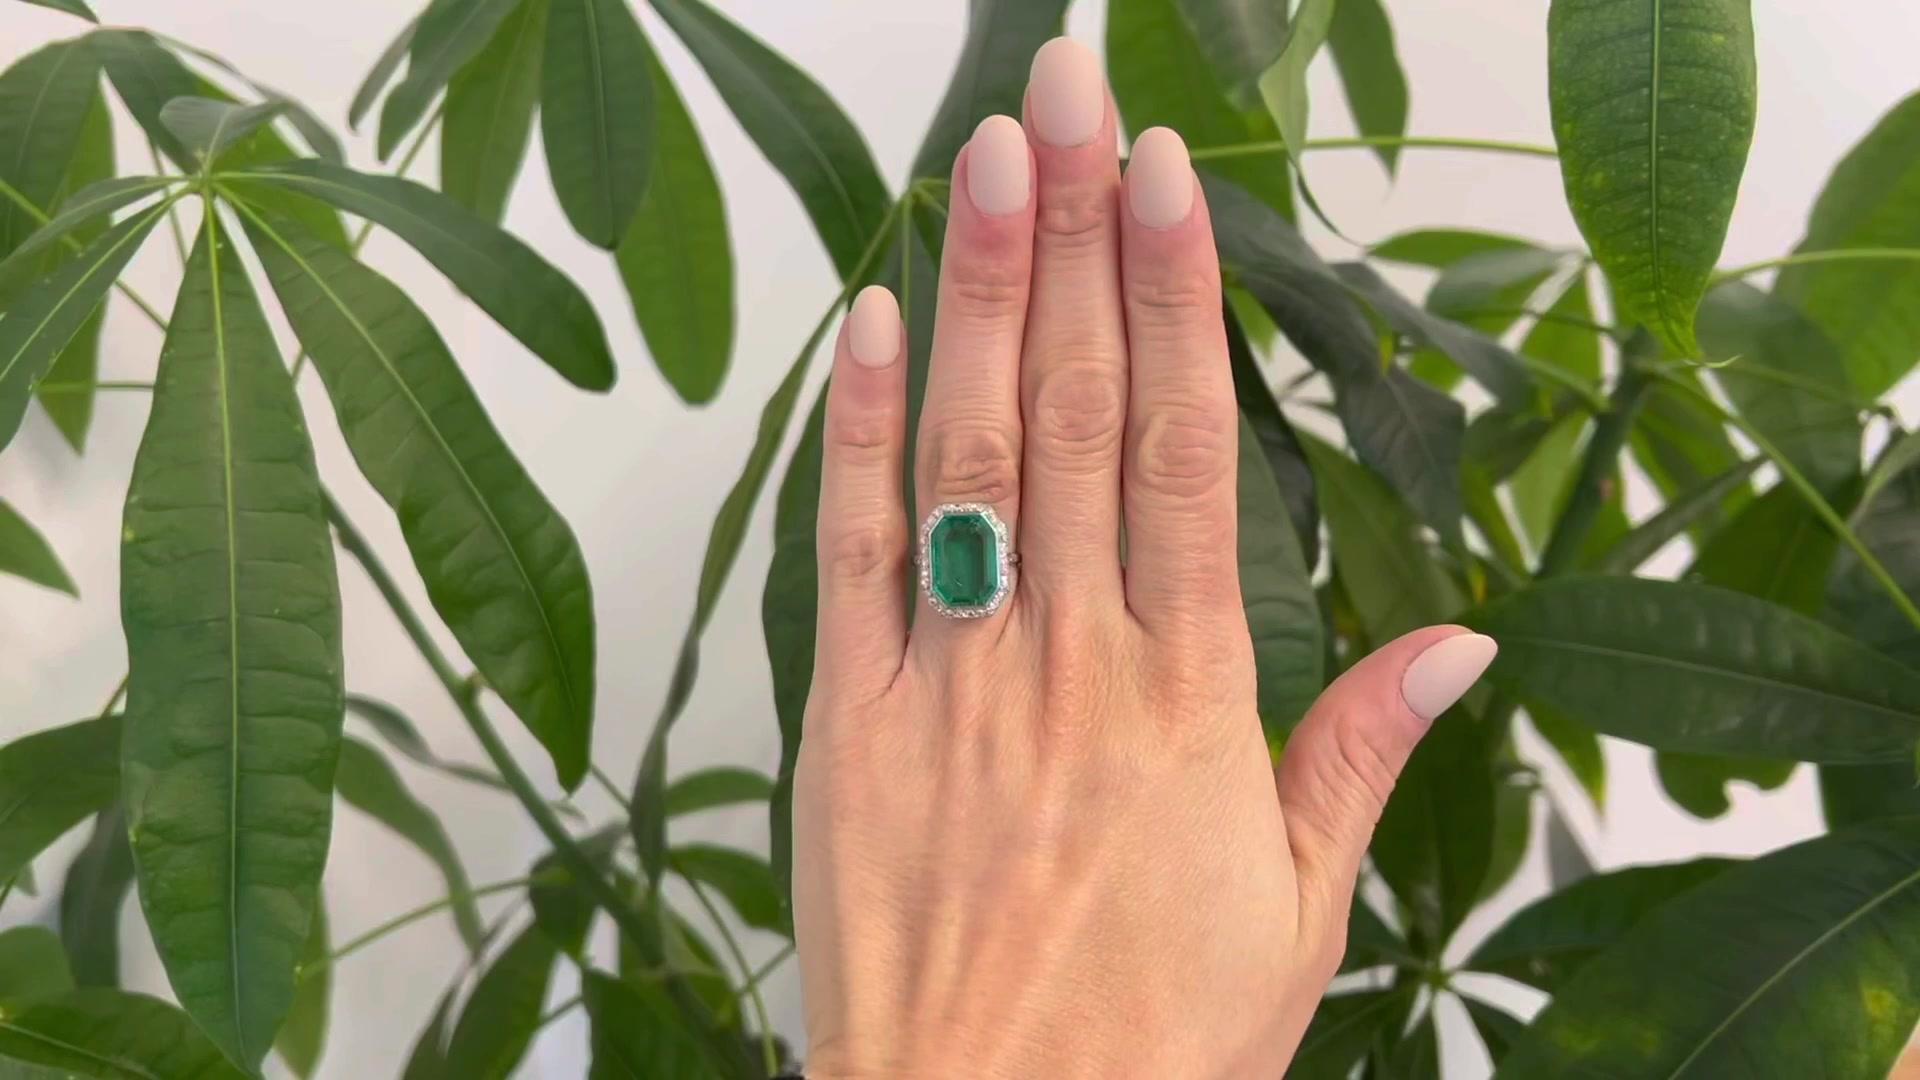 One Art Deco AGL 5.00 Carat  Colombian Emerald Diamond Platinum Ring. Featuring one AGL octagonal step cut emerald weighing approximately 5.00 carats, accompanied by AGL #1127317 stating the emerald is of Colombian origin and has minor oil